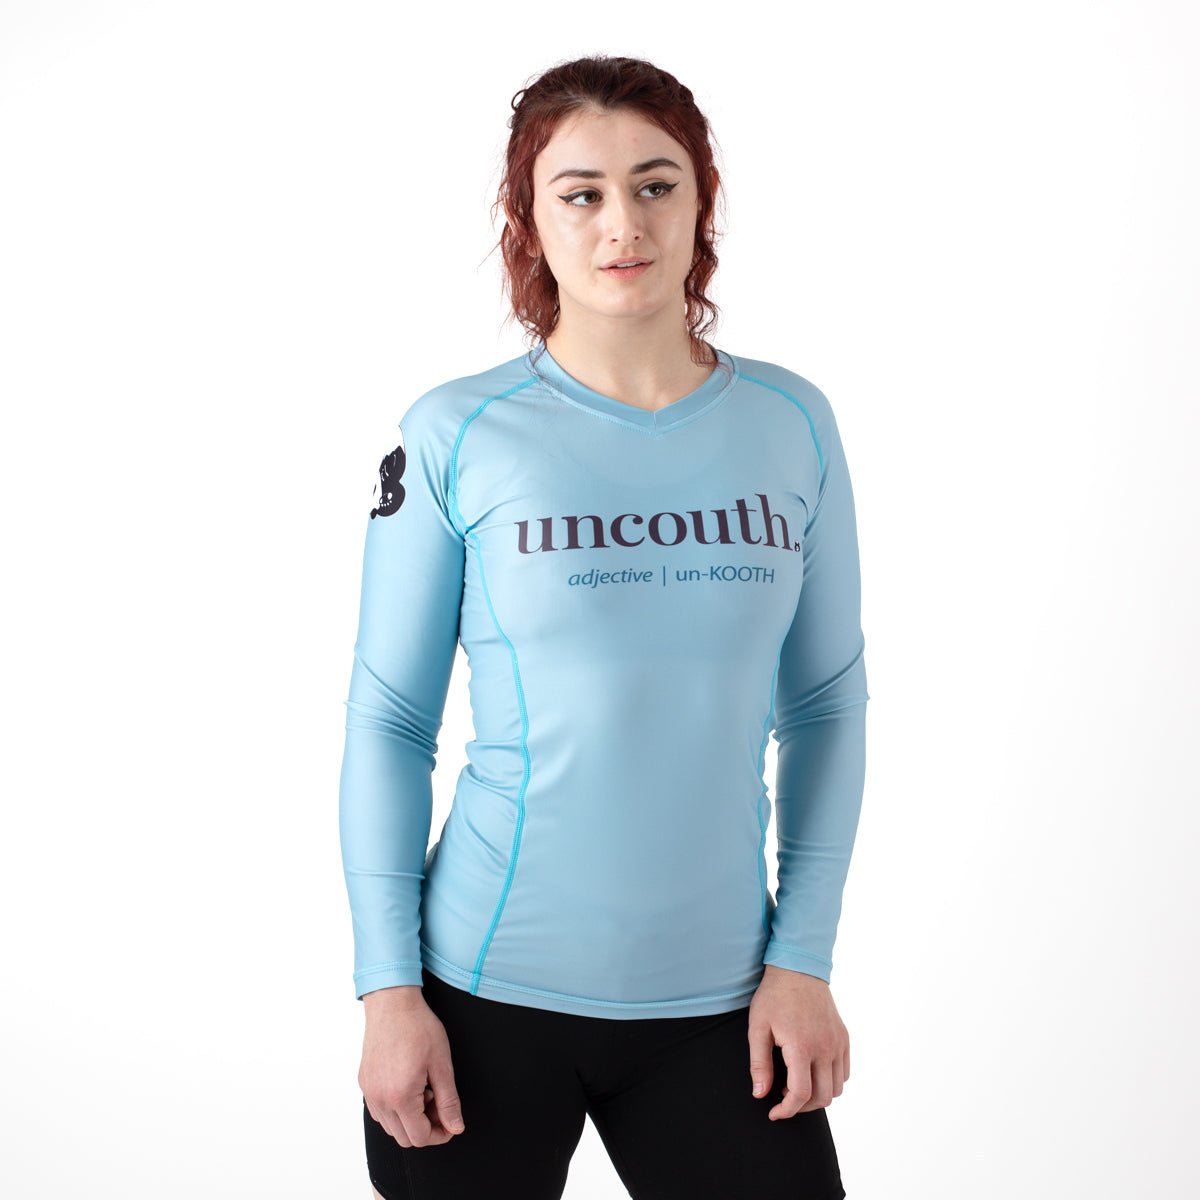 Inverted Gear "Uncouth" Women's Long Sleeve Rash Guard